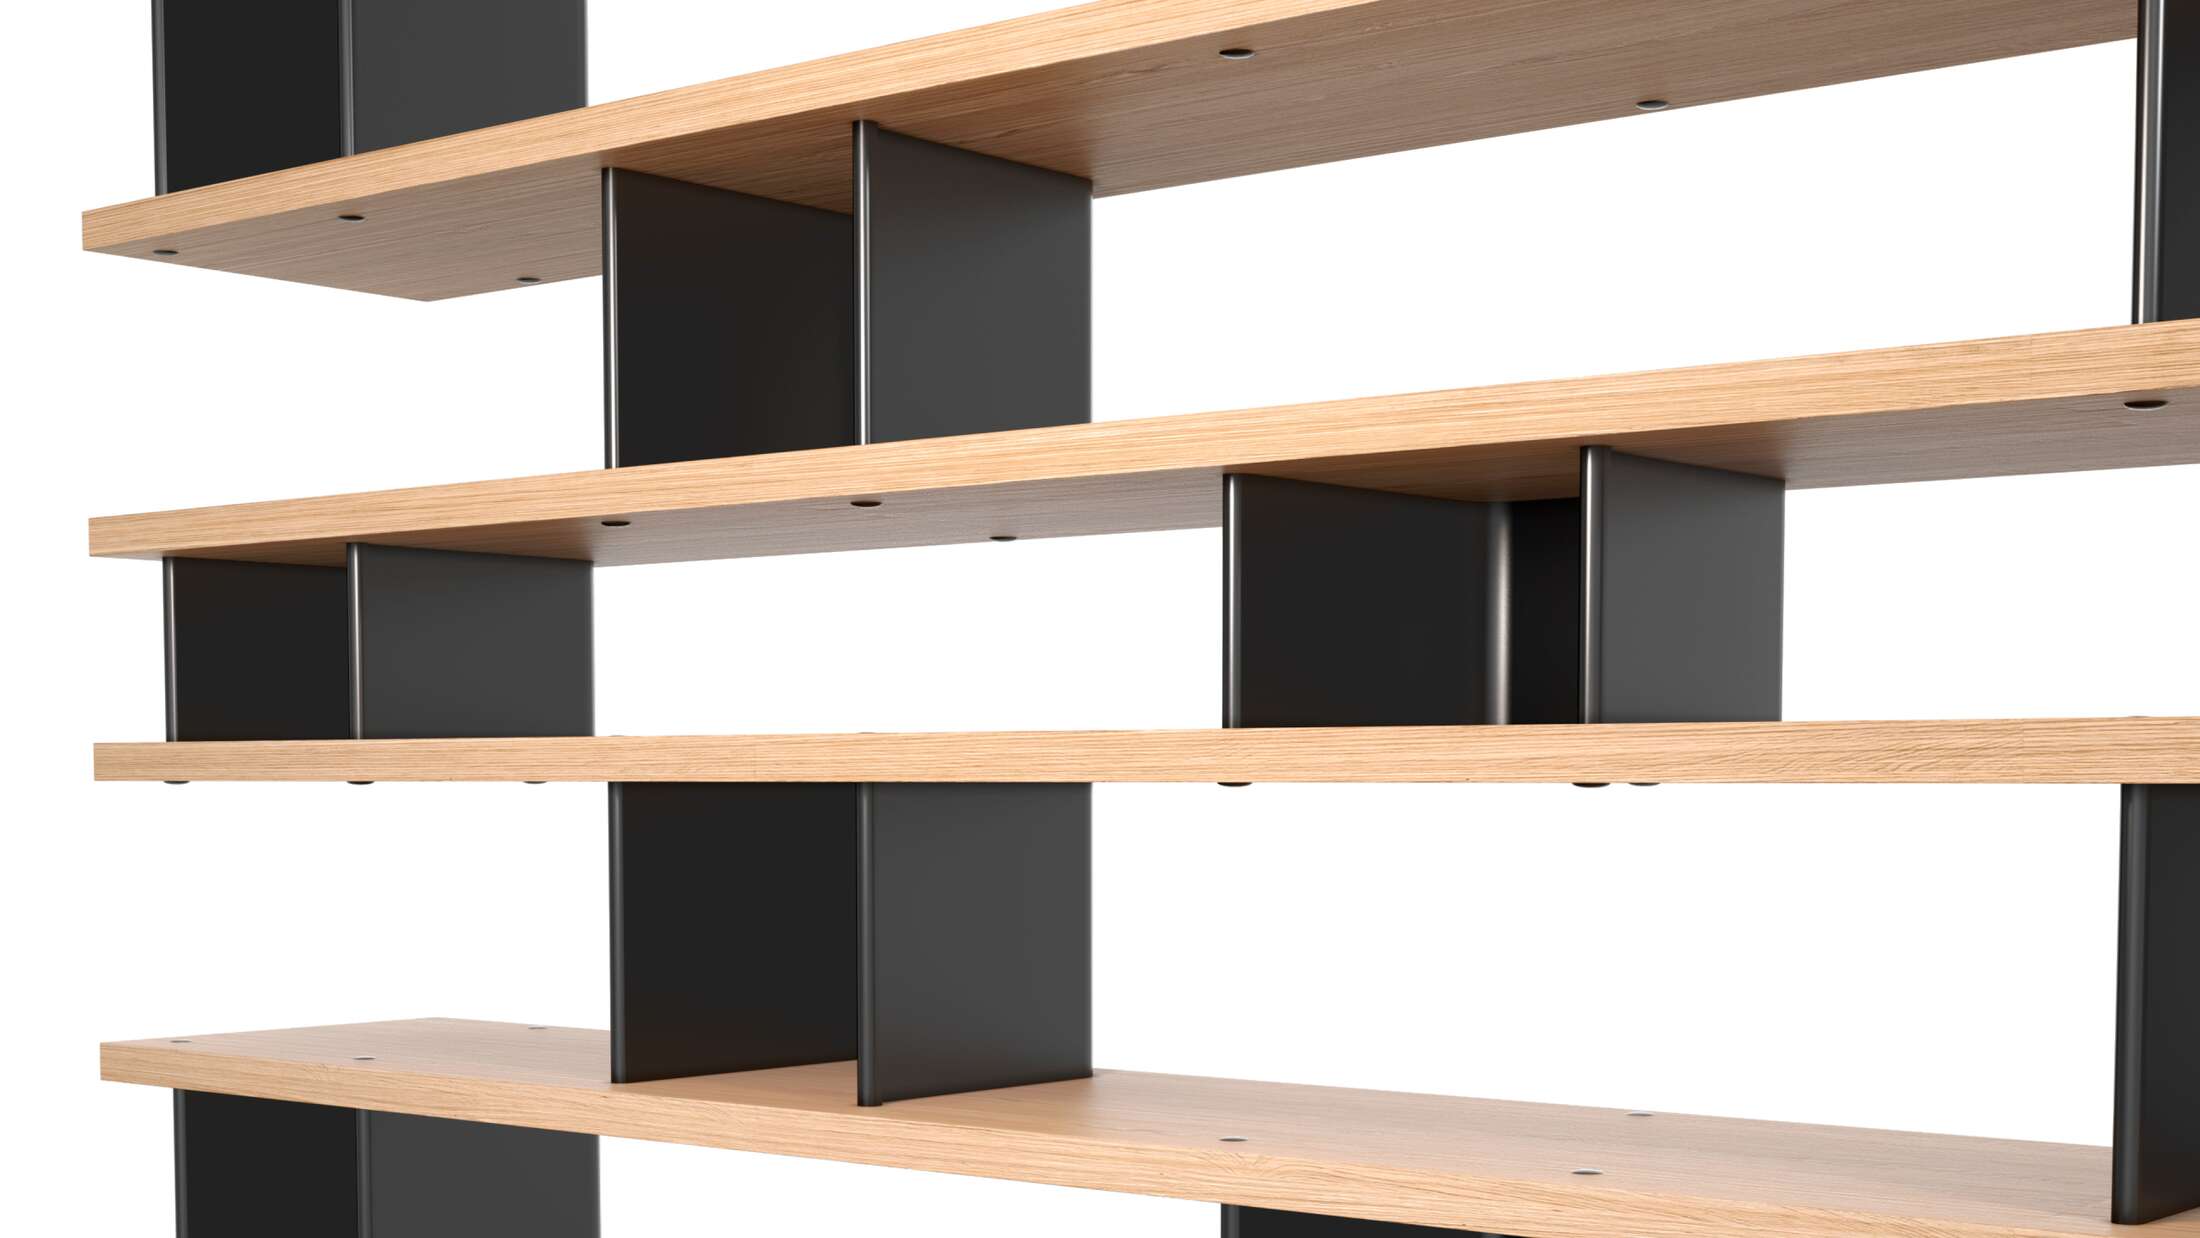 Prices vary dependent on the material/color/model of the product. Shelving unit designed by Charlotte Perriand in 1952-56. Relaunched by Cassina in 2012. Manufactured by Cassina in Italy.